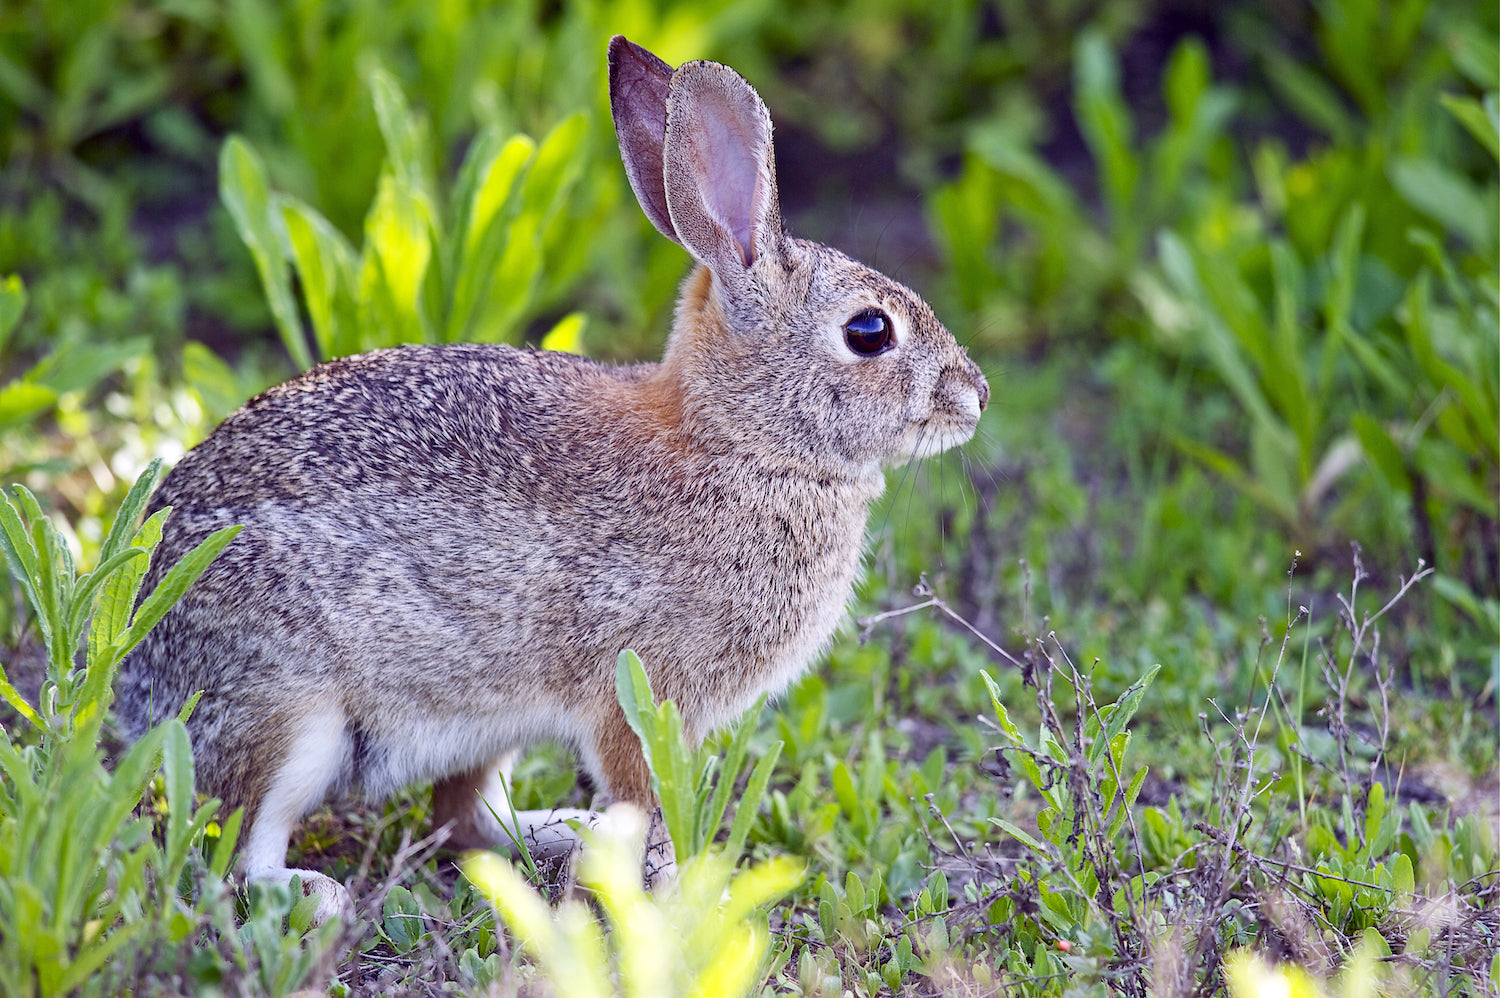 Controlling Rabbits in Your Garden